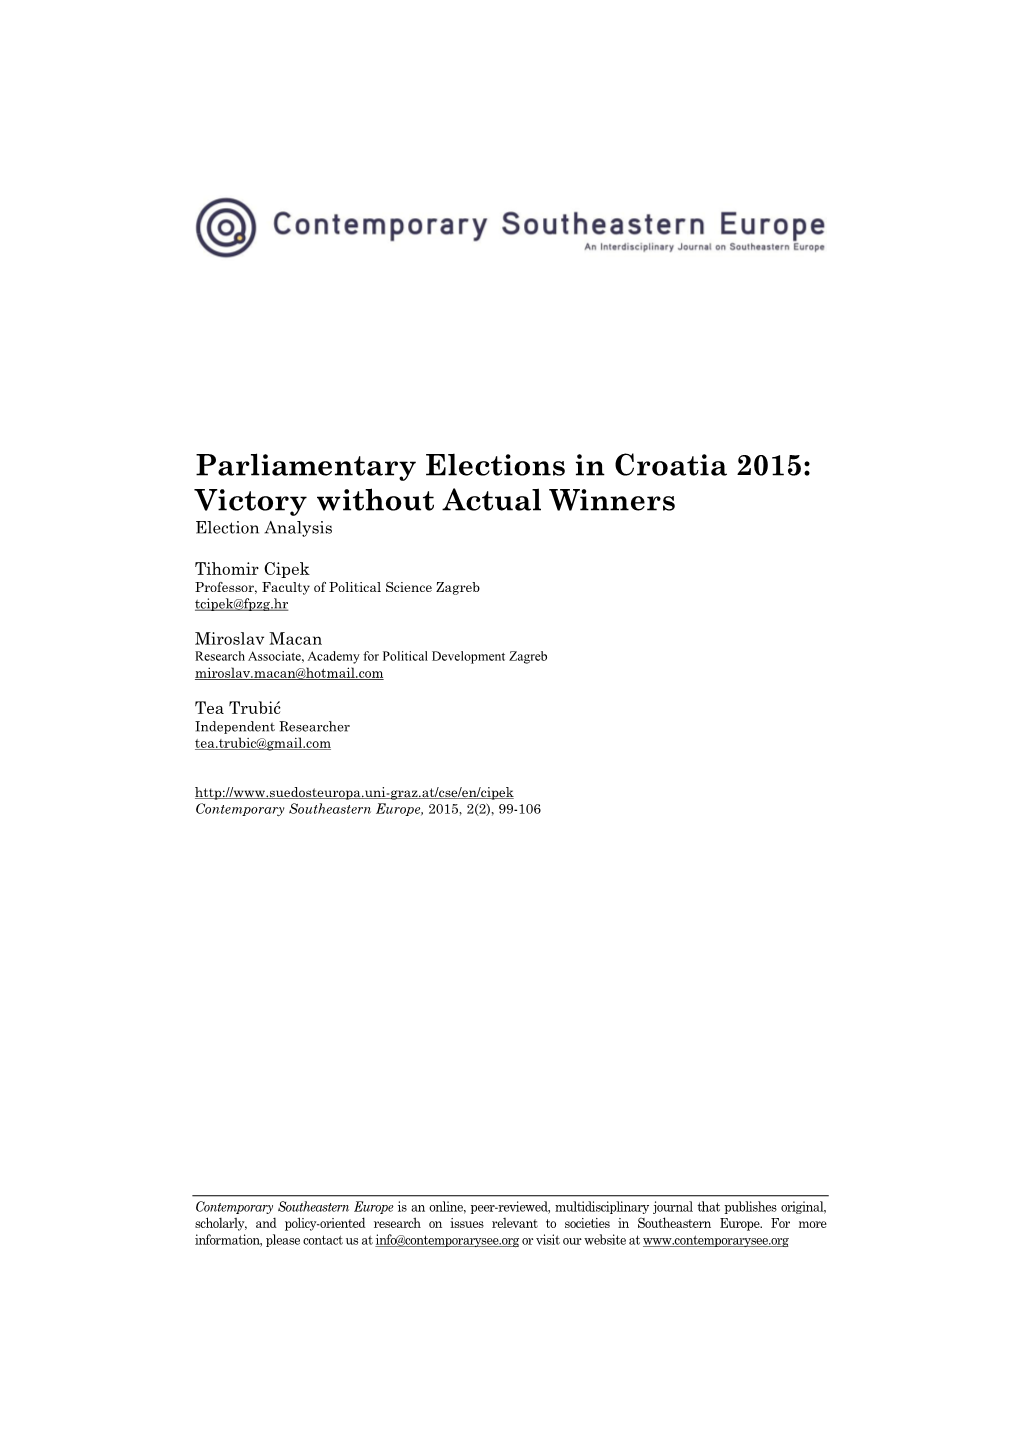 Parliamentary Elections in Croatia 2015: Victory Without Actual Winners Election Analysis